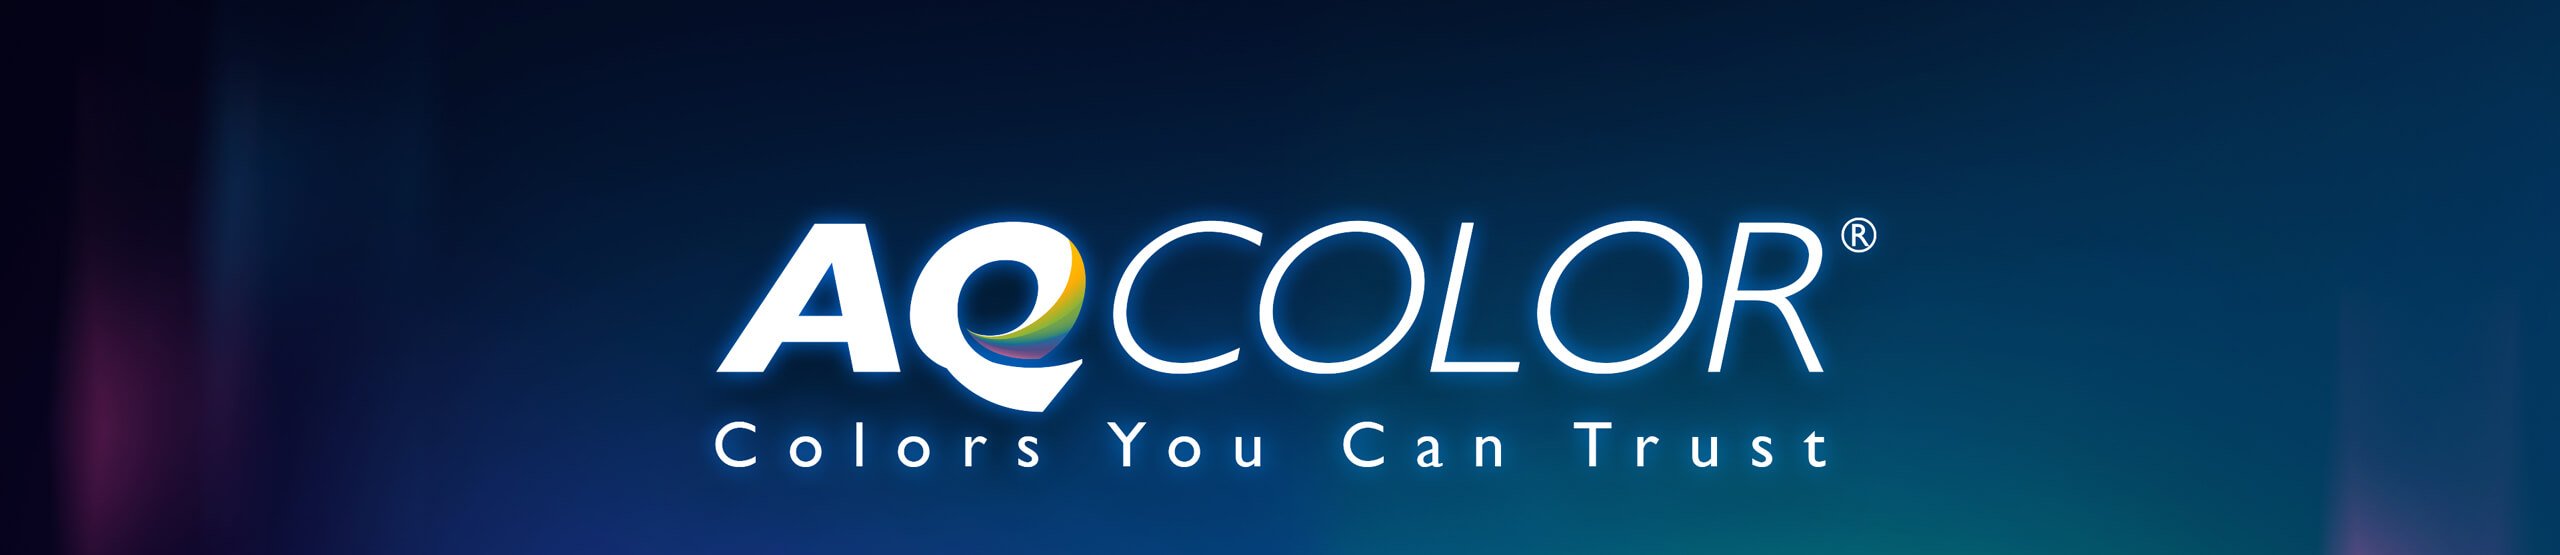 aqcolor technology from benq colors you can trust